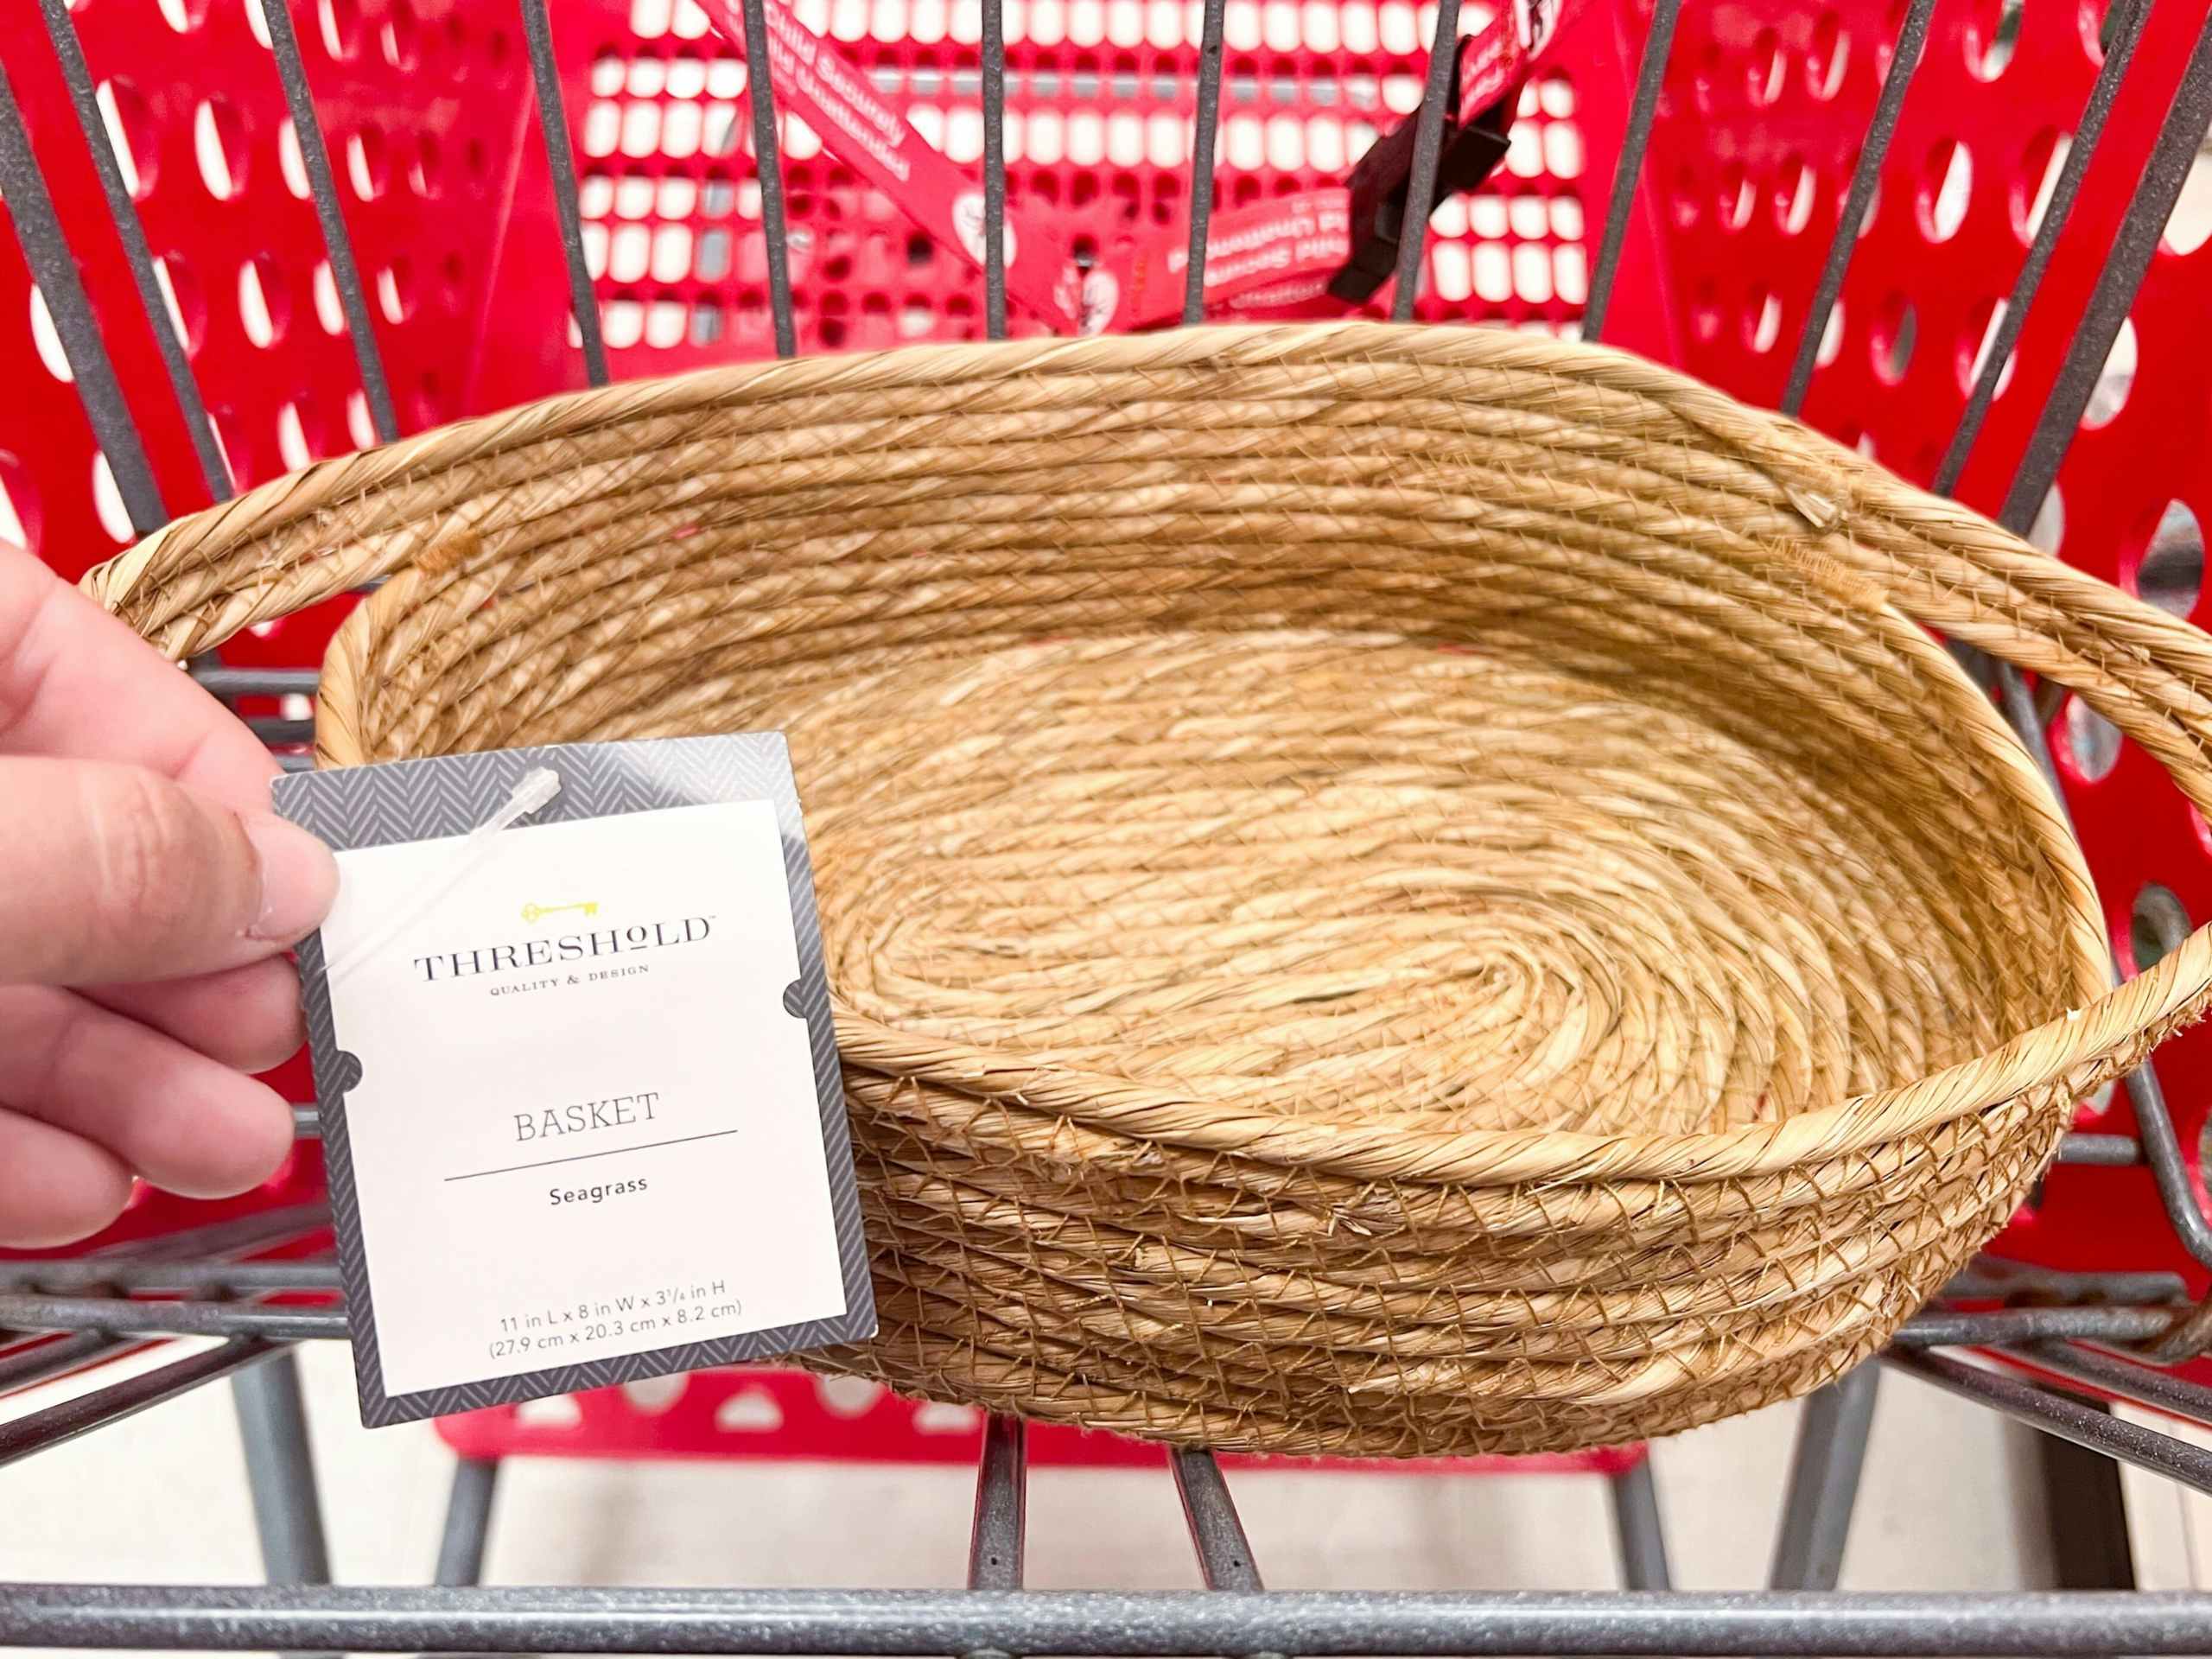 Threshold seagrass basket sitting in a cart with a hand holding the tag in front